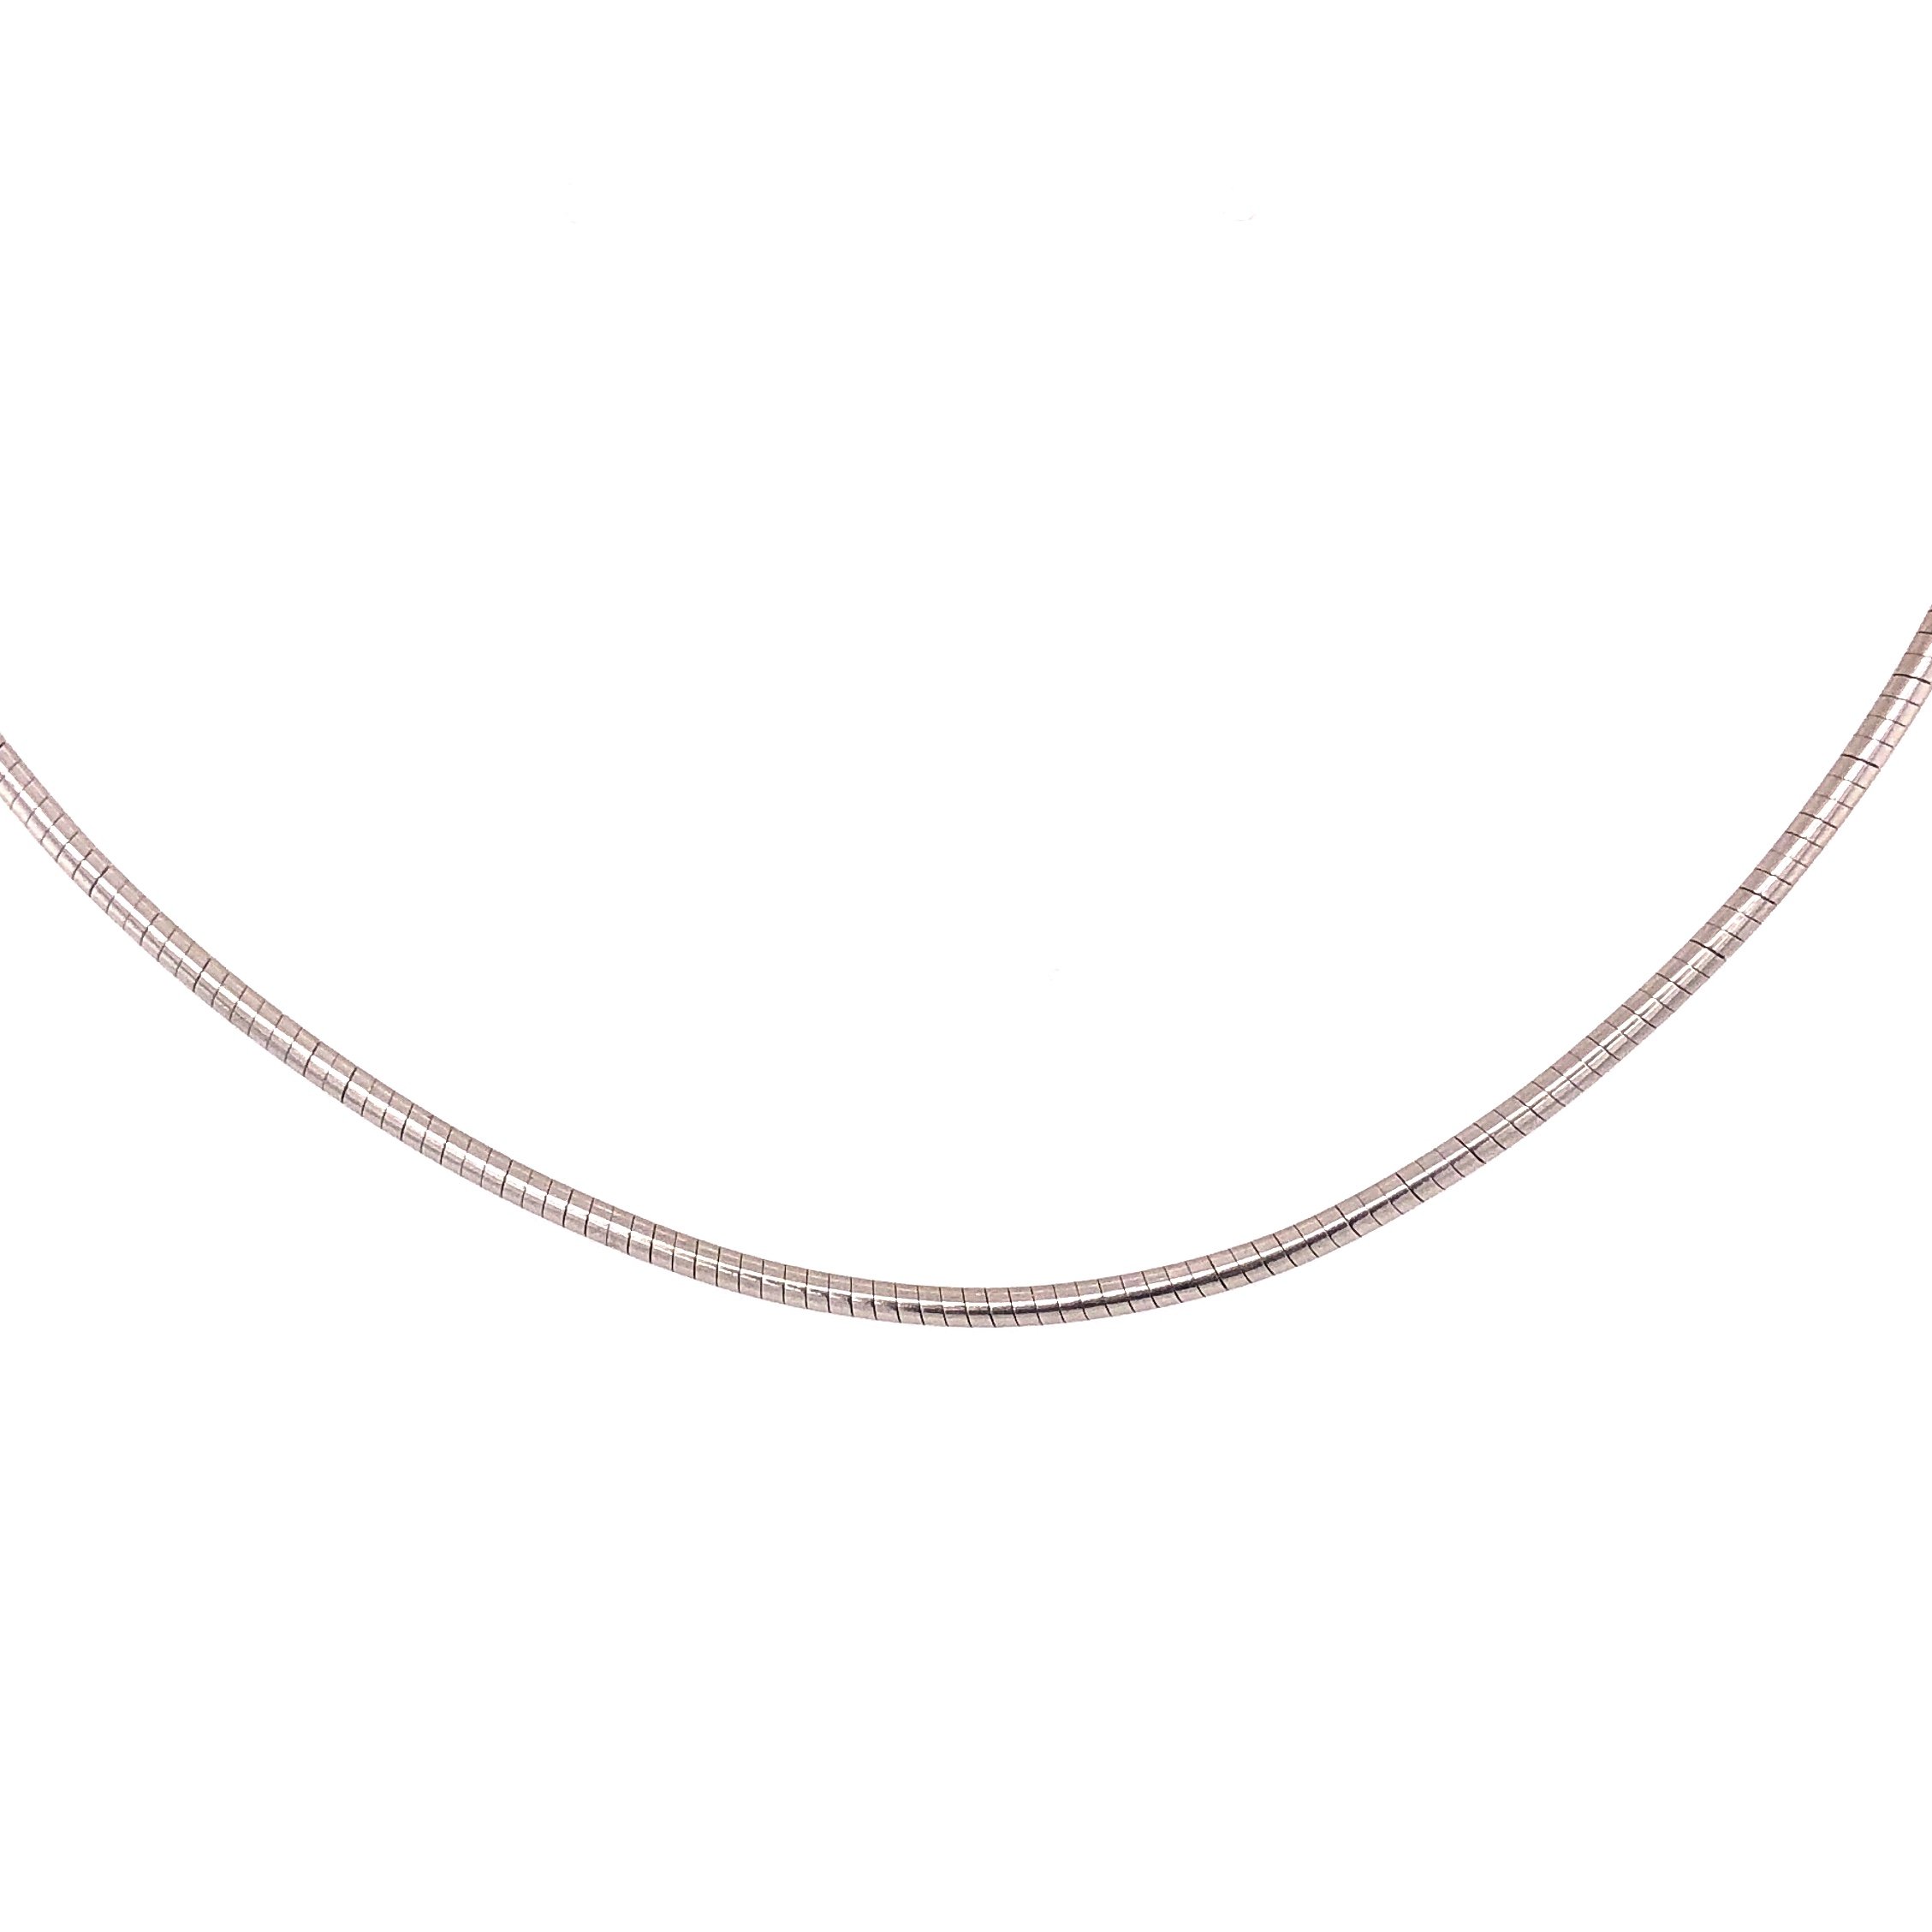 14K White Gold ITALIAN 1.4mm Thin Omega Chain Necklace 7.3g, 16"